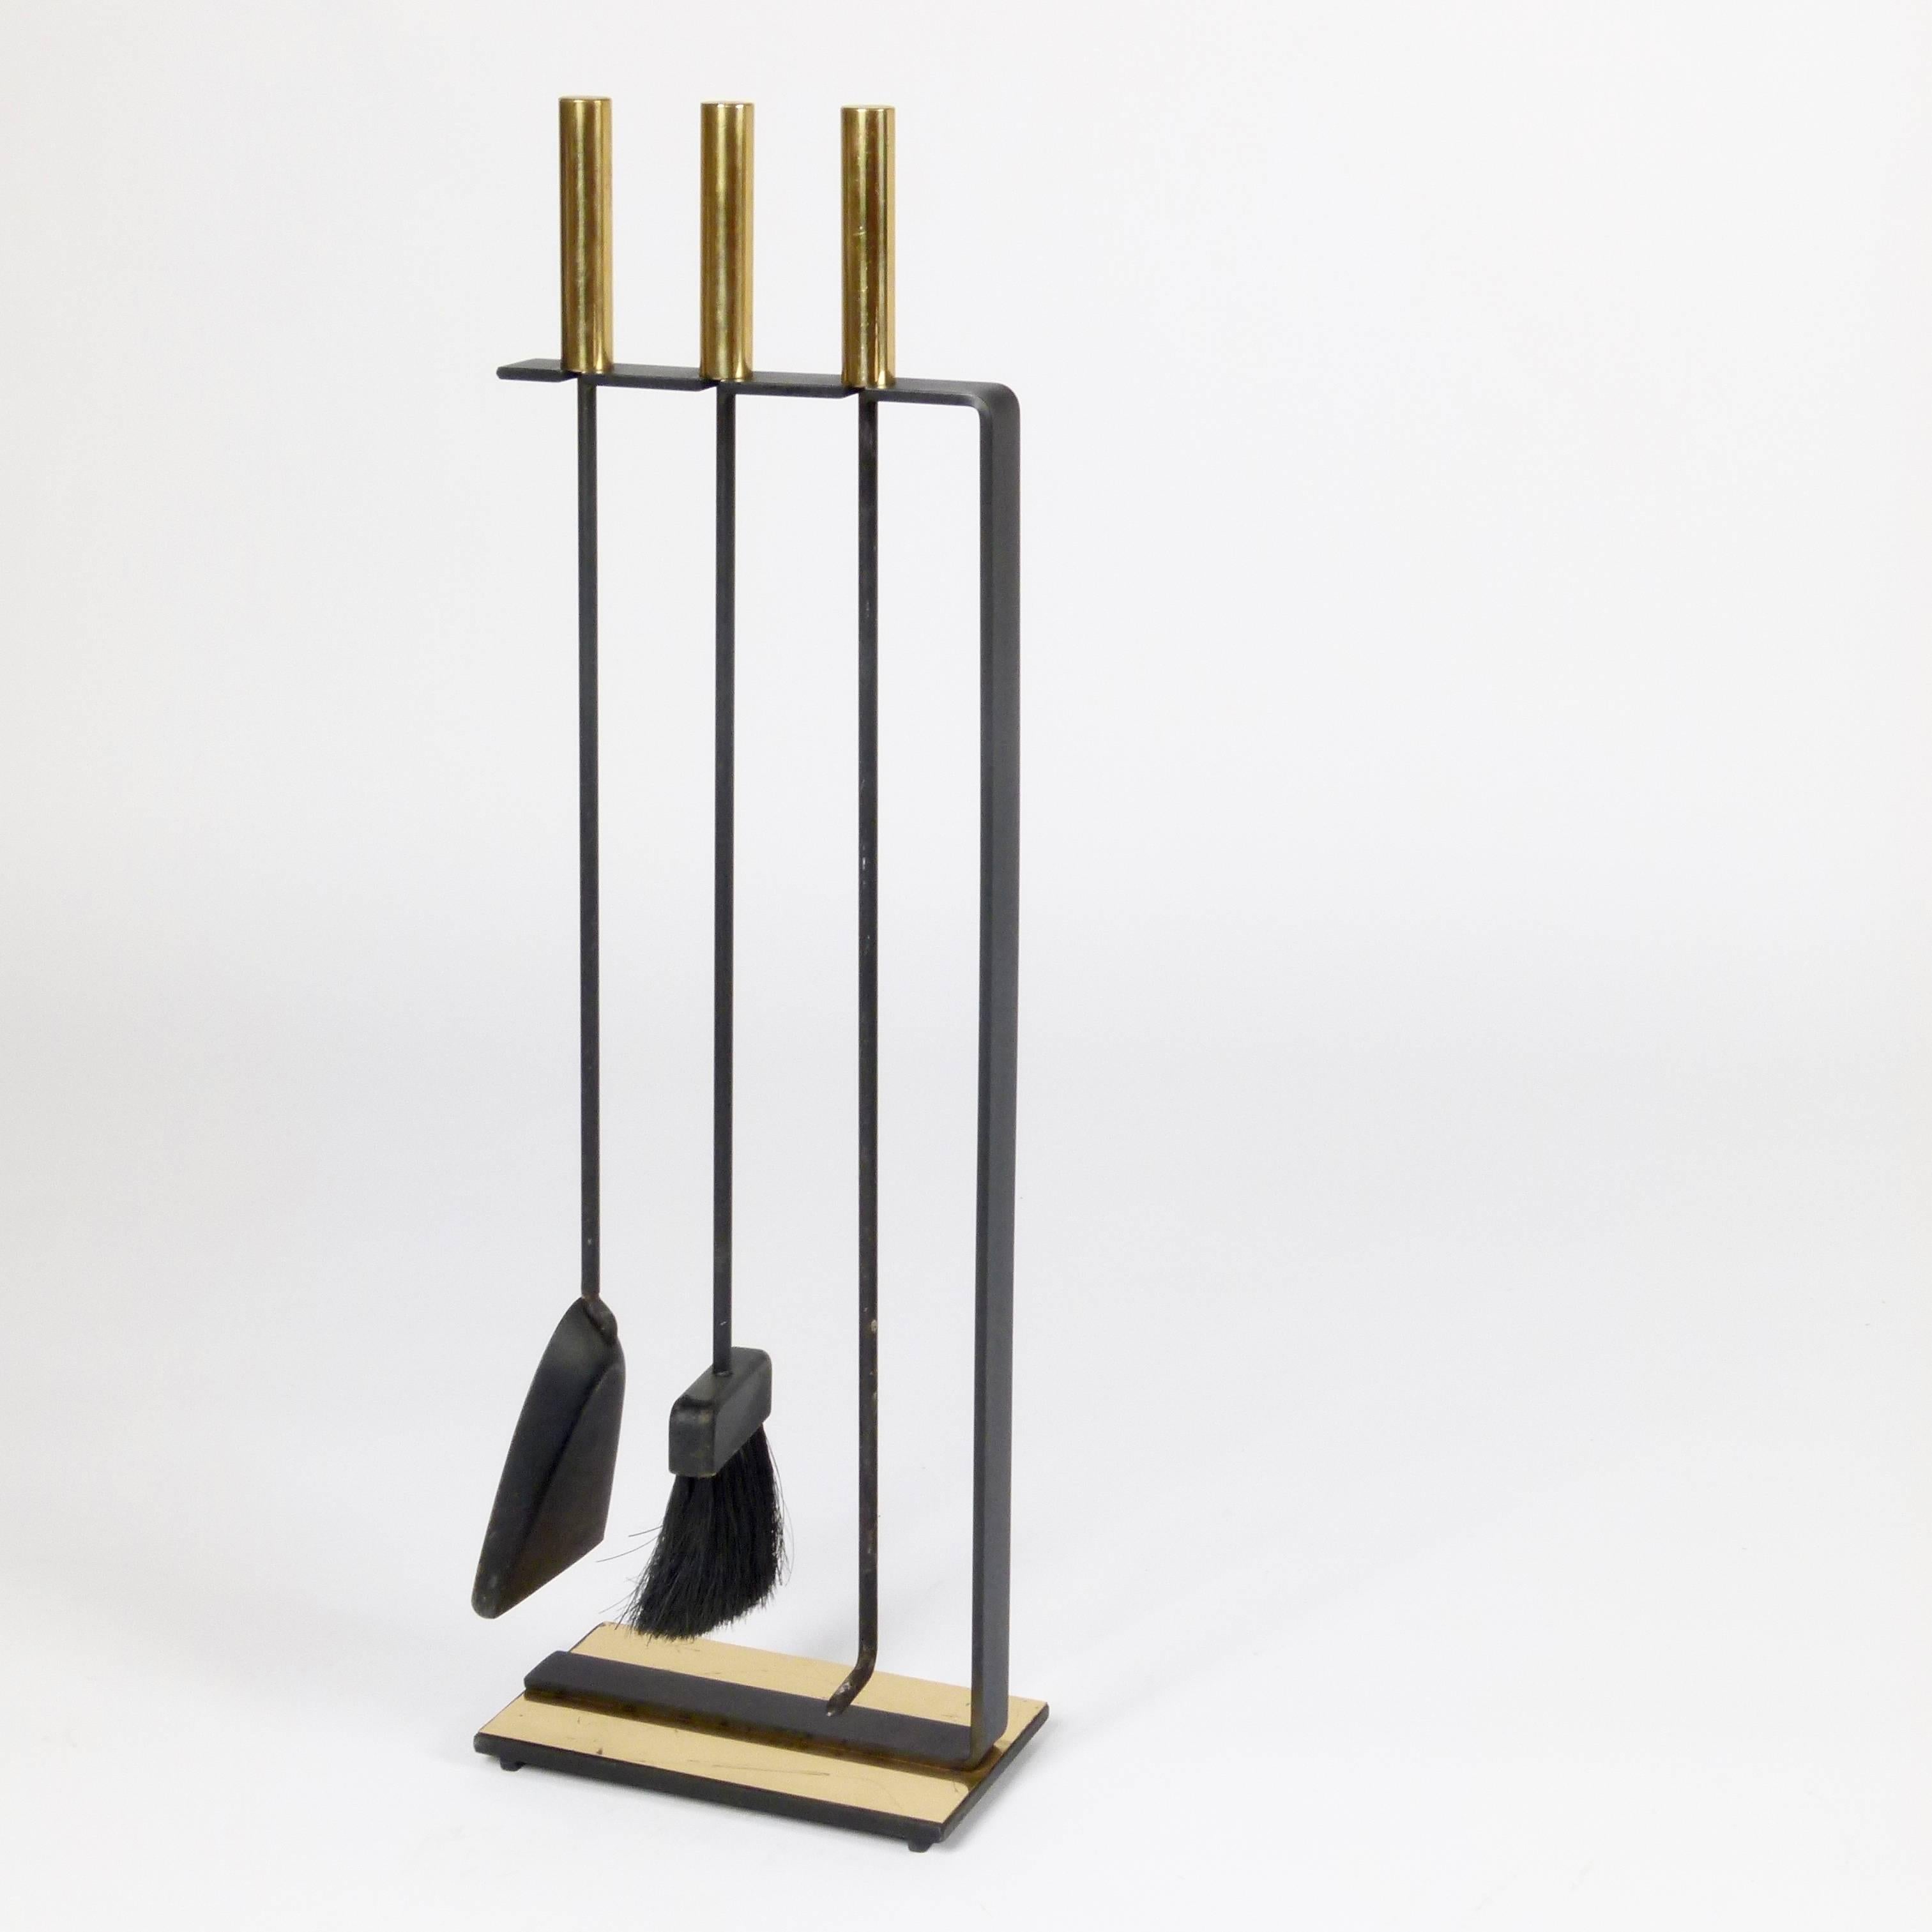 C. 1960 cleaned lined 4-piece fireplace tool set in polished brass and wrought iron by Pilgrim.  This beautiful set has normal wear with perfectly maintained heavy brass handles over wrought iron tool and weighted iron stand.  The only